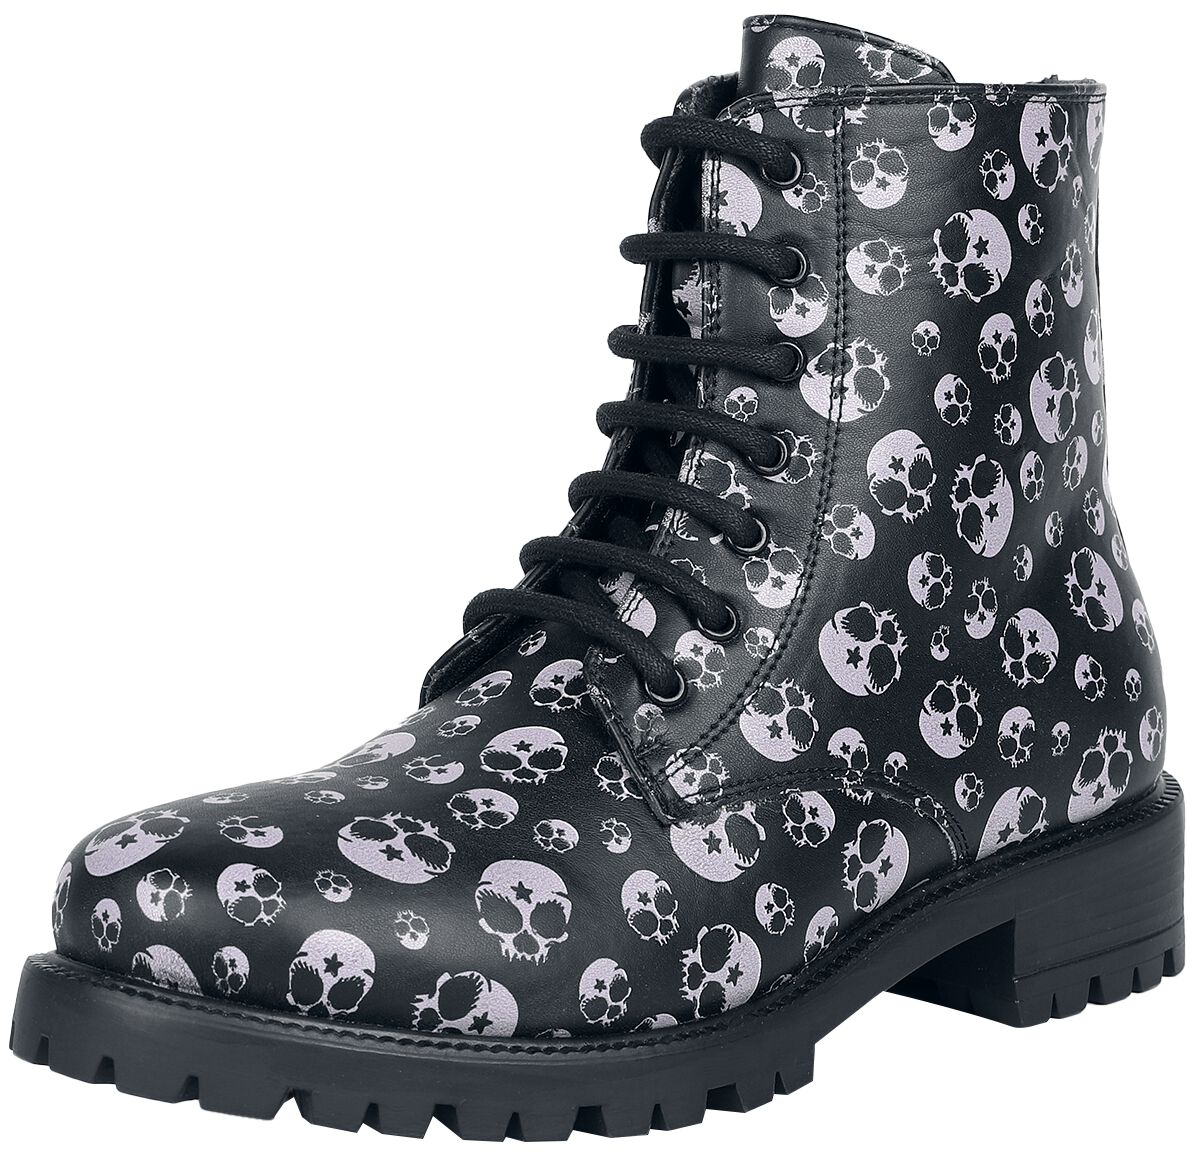 Full Volume by EMP Boots with Skull Alloverprint Boot schwarz in EU40